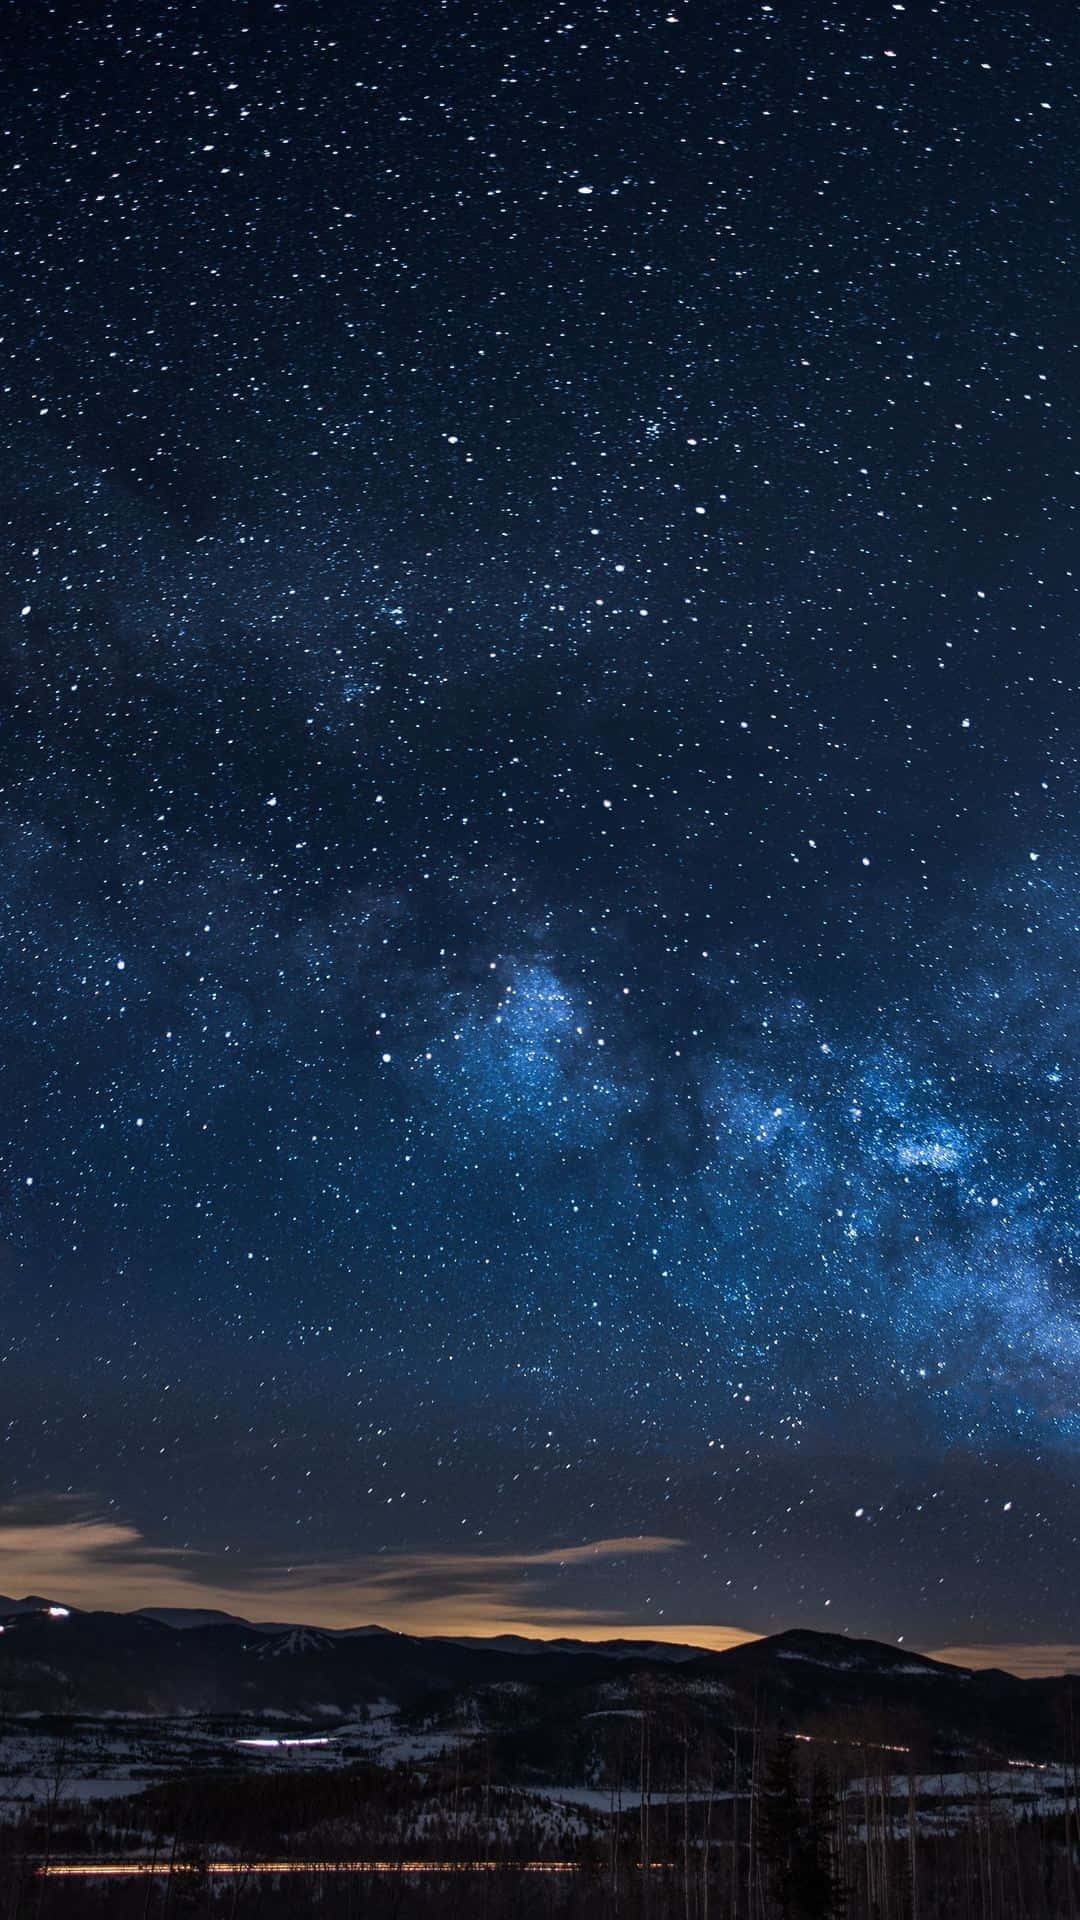 Download A serene image of the starry night sky | Wallpapers.com